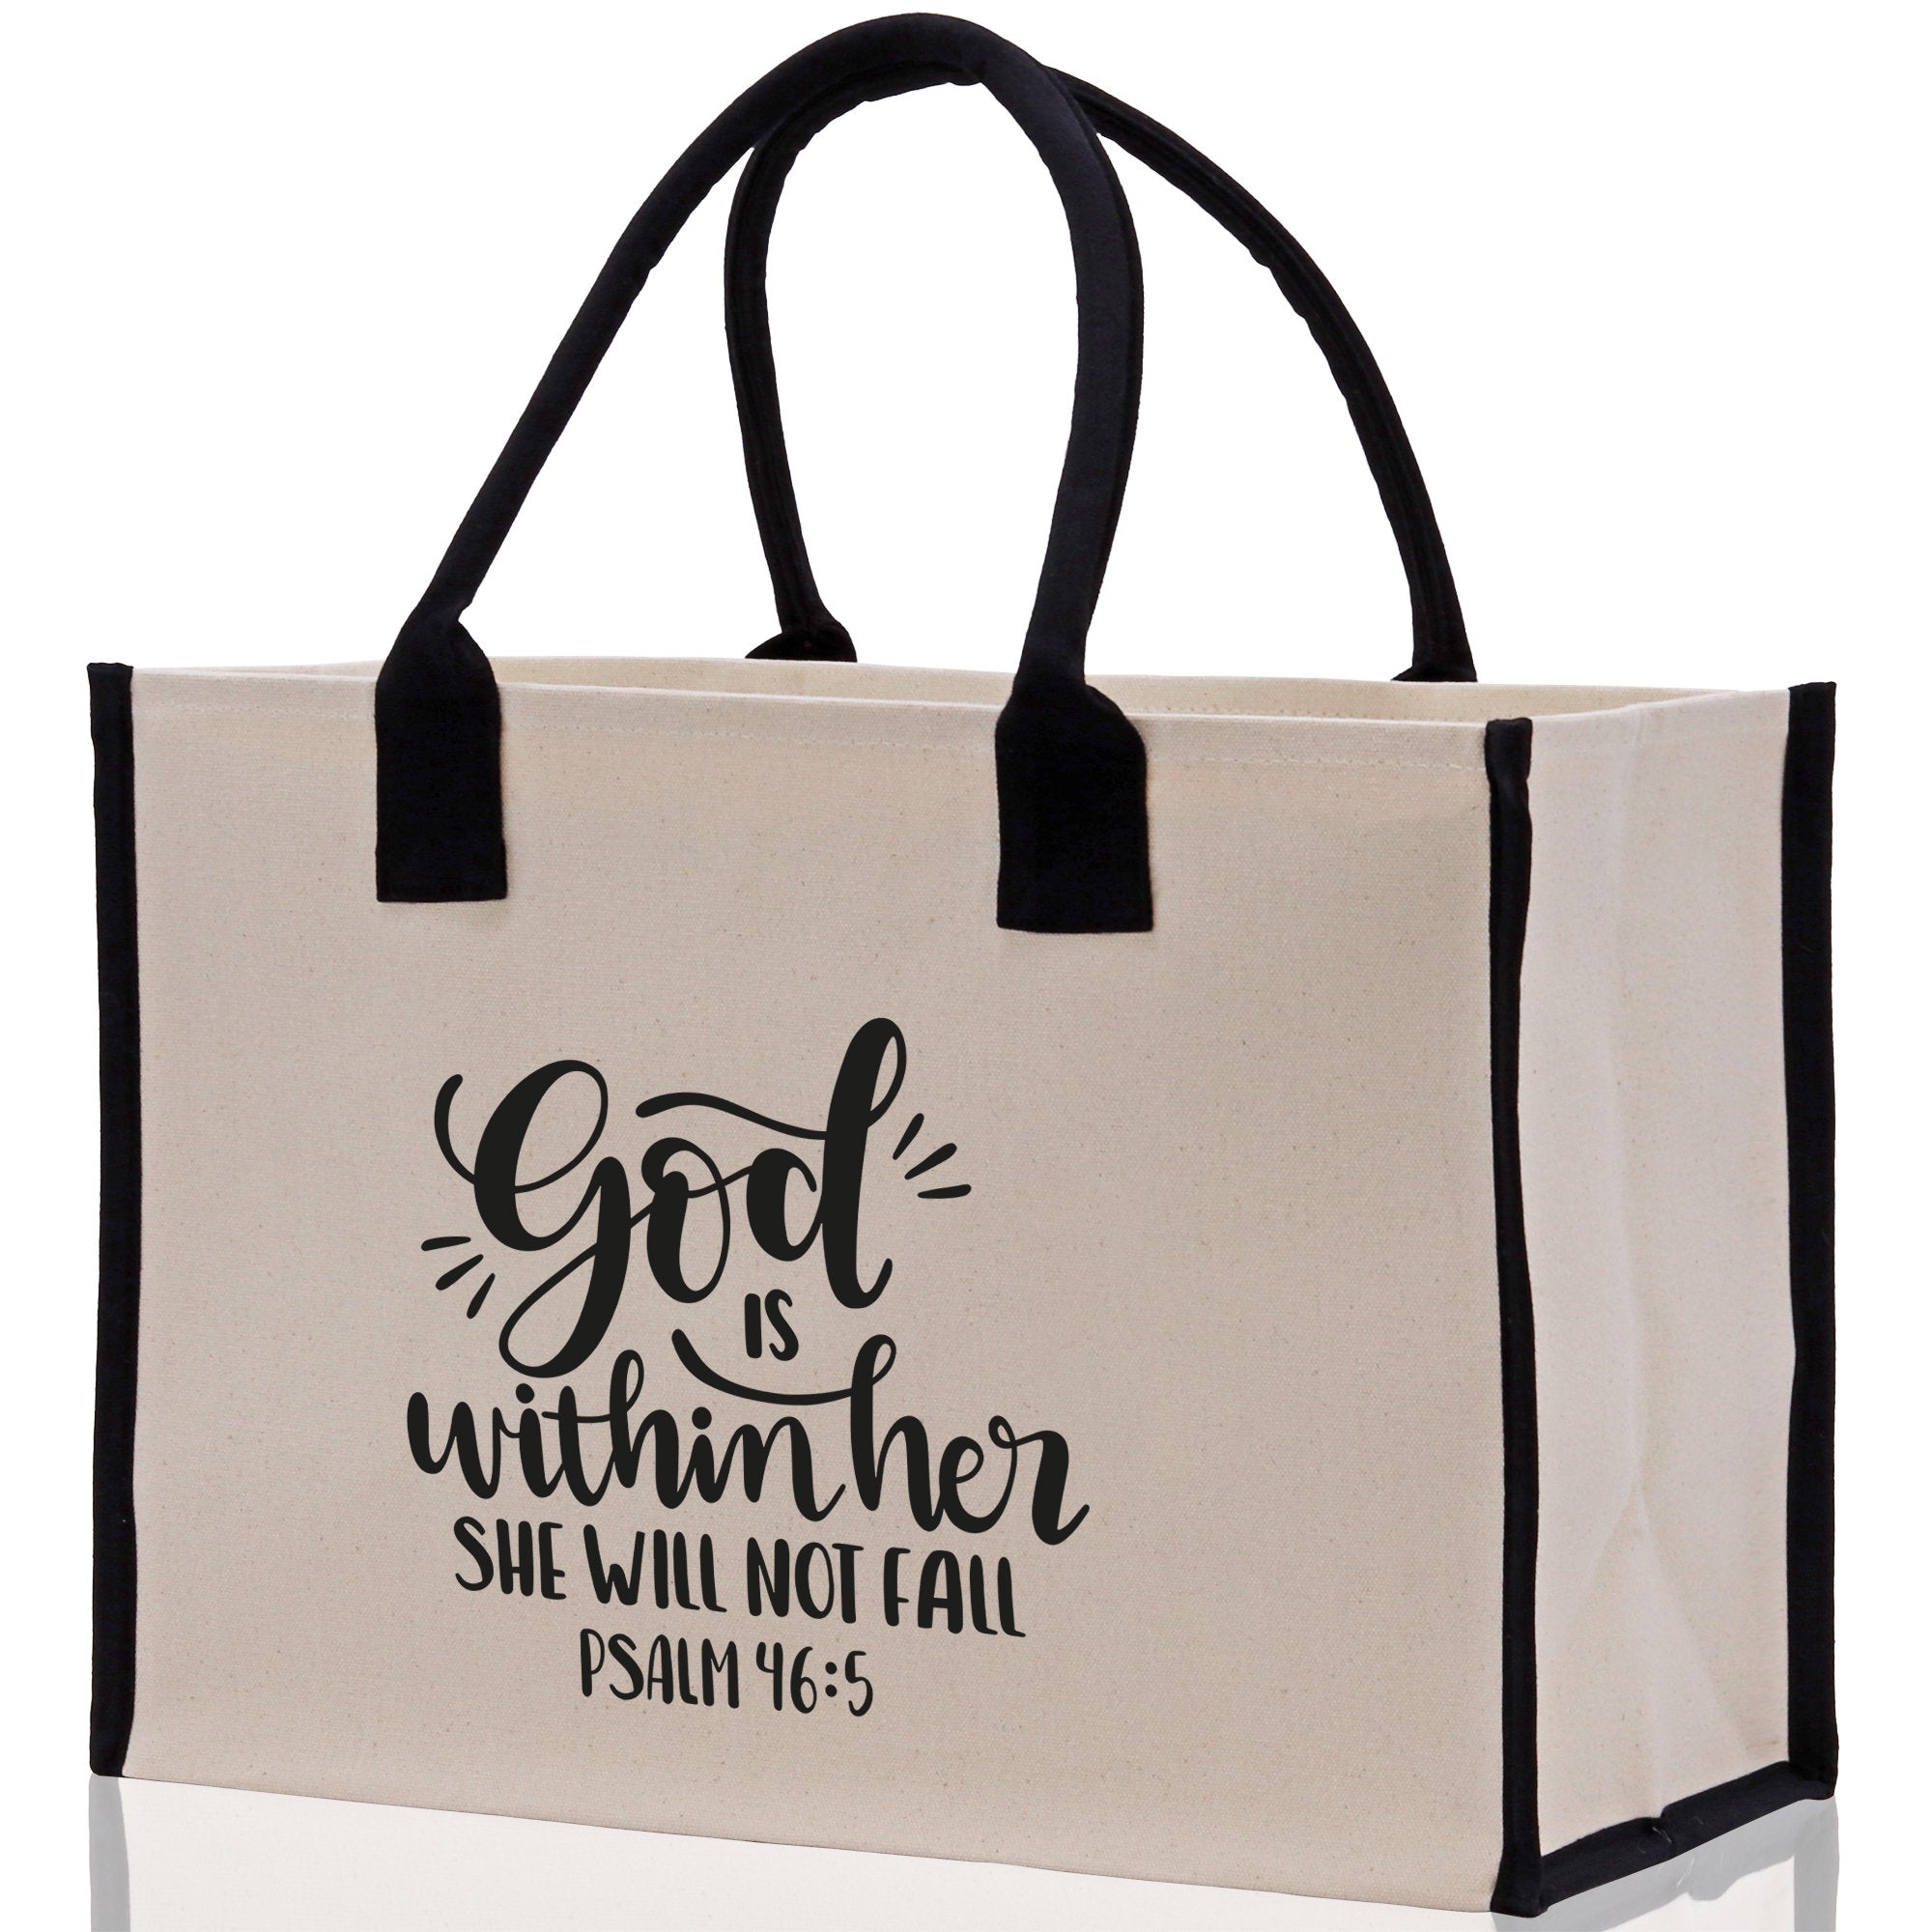 God is within her She will not fall PSALM 46:5 Religious Tote Bag for Women Bible Verse Canvas Tote Bag Religious Gifts Church Tote Bag